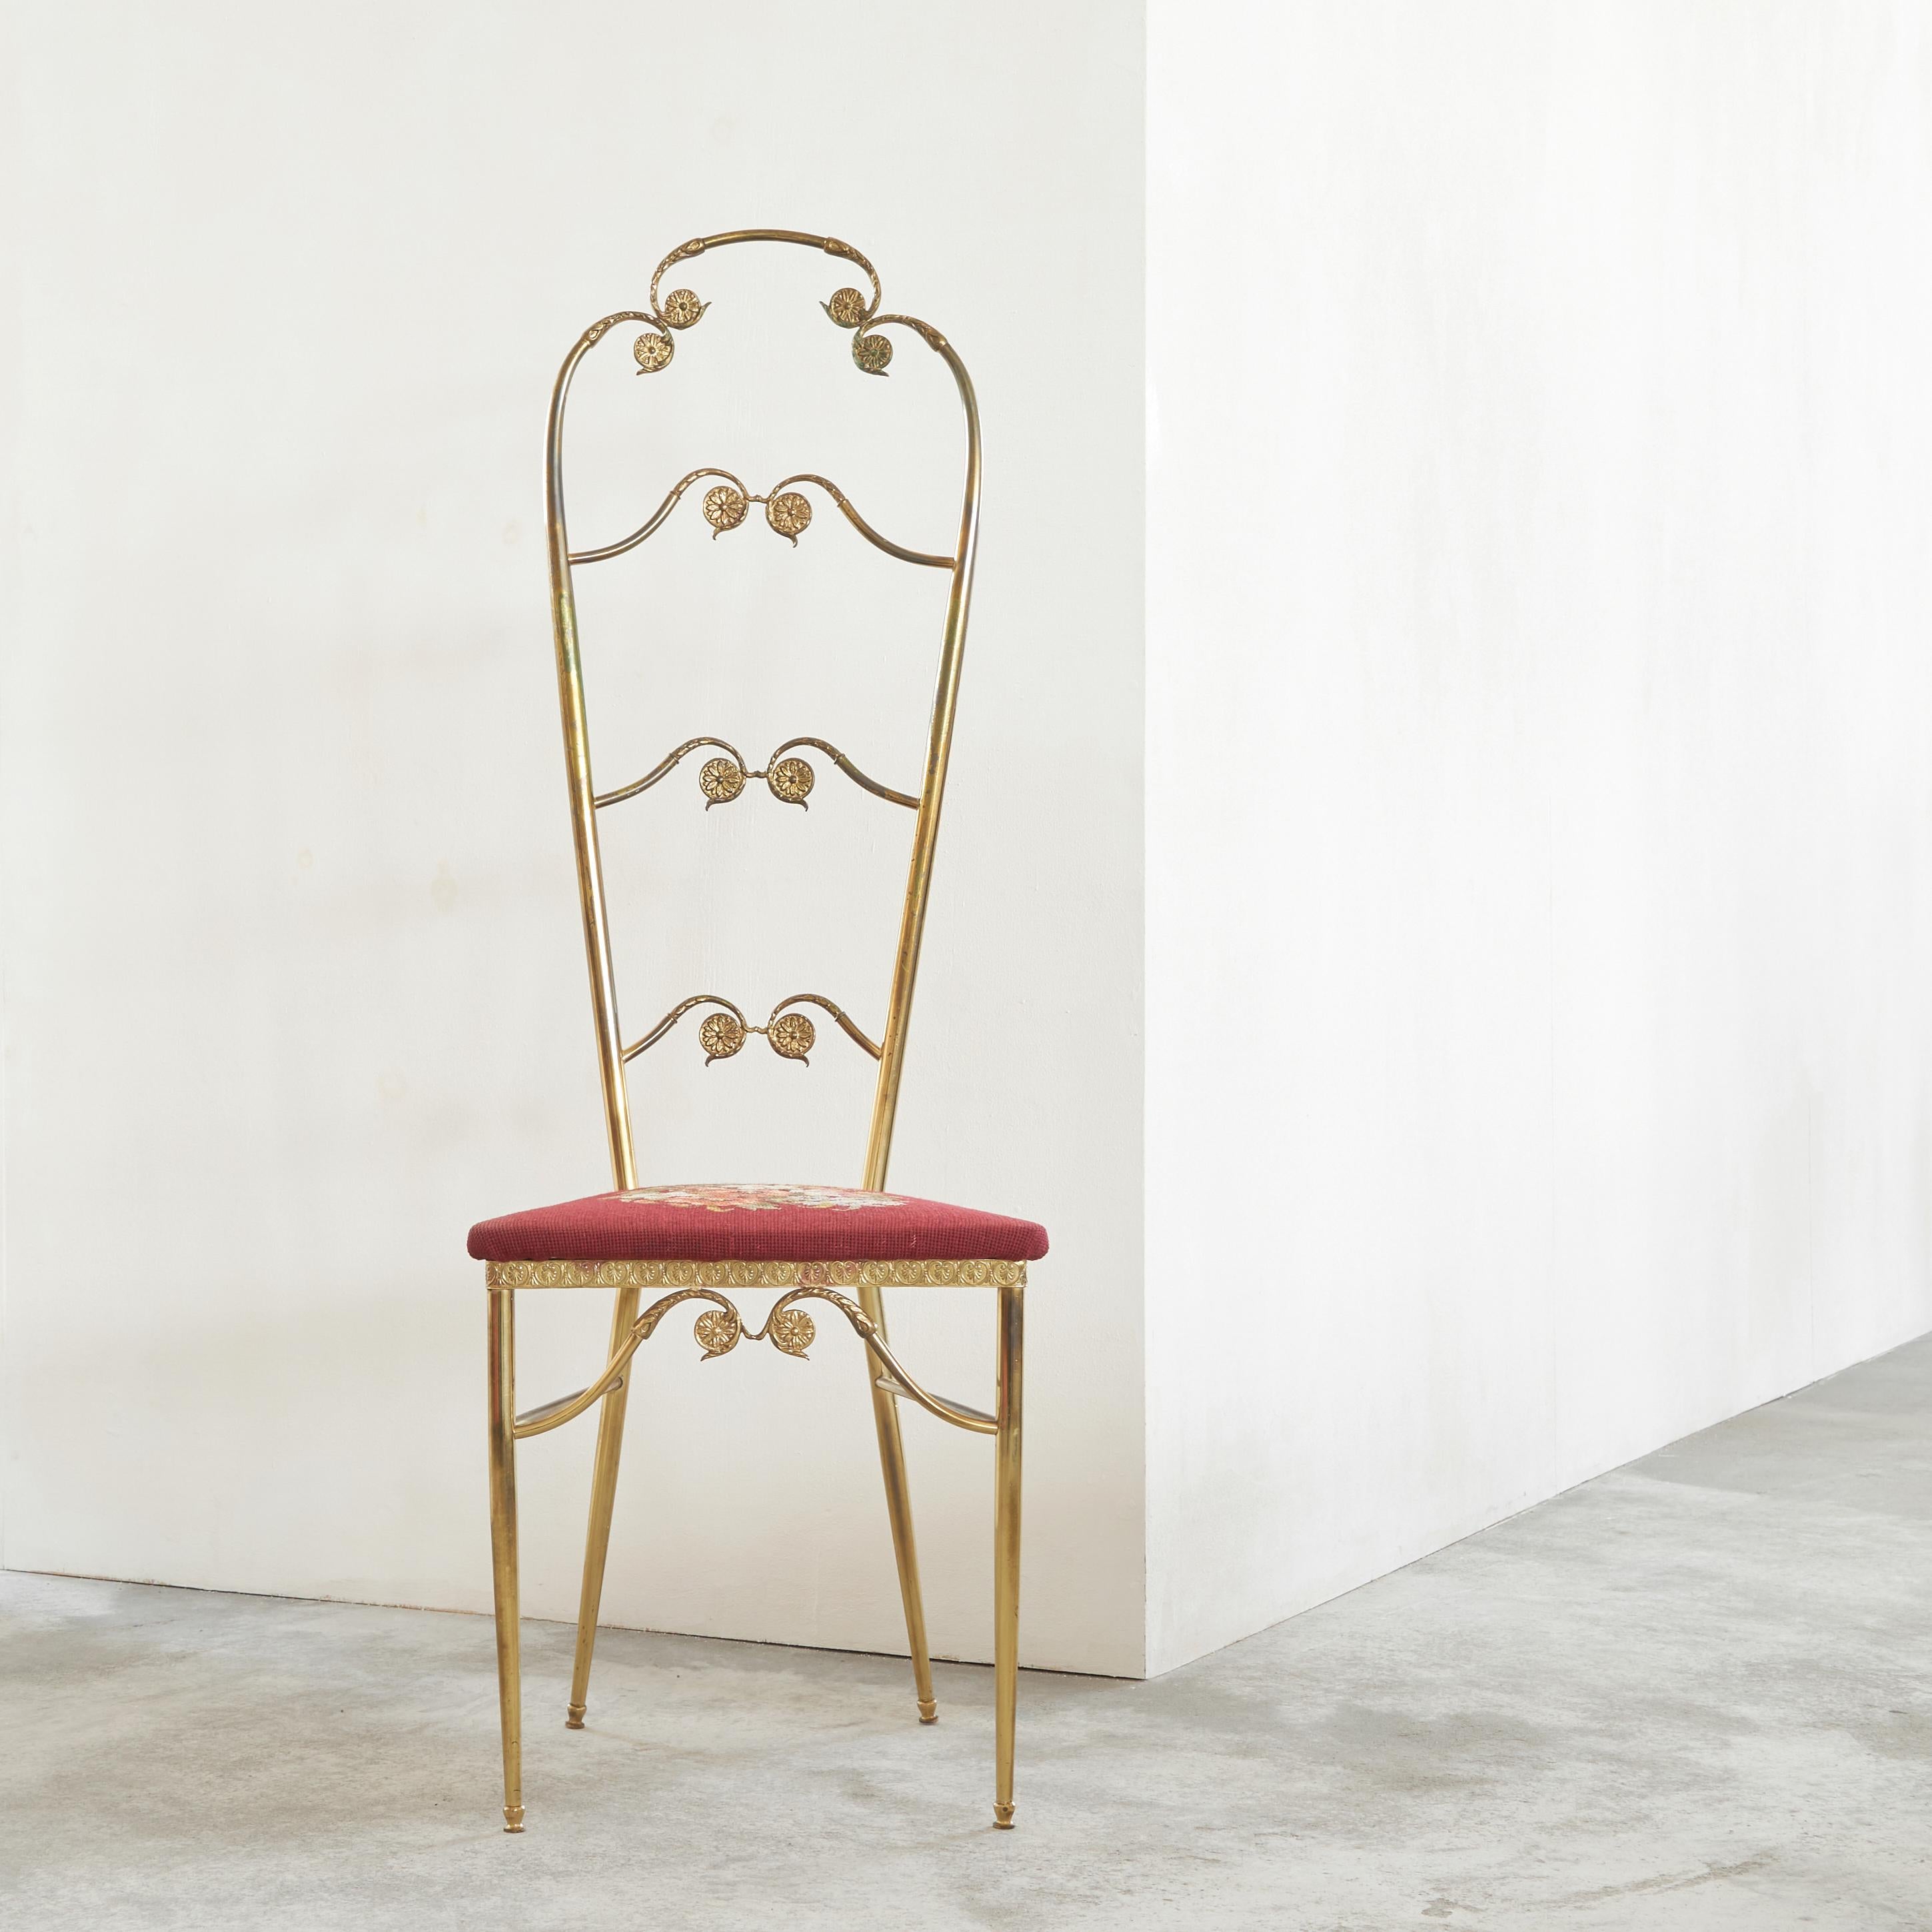 High Back Chiavari Chair in Brass and Embroidery, Europe, 1960s.

Looking for something extraordinary to compliment your interior? This wonderful Chiavari chair in brass and embroidery could be a perfect fit. Whimsical and elegant at the same